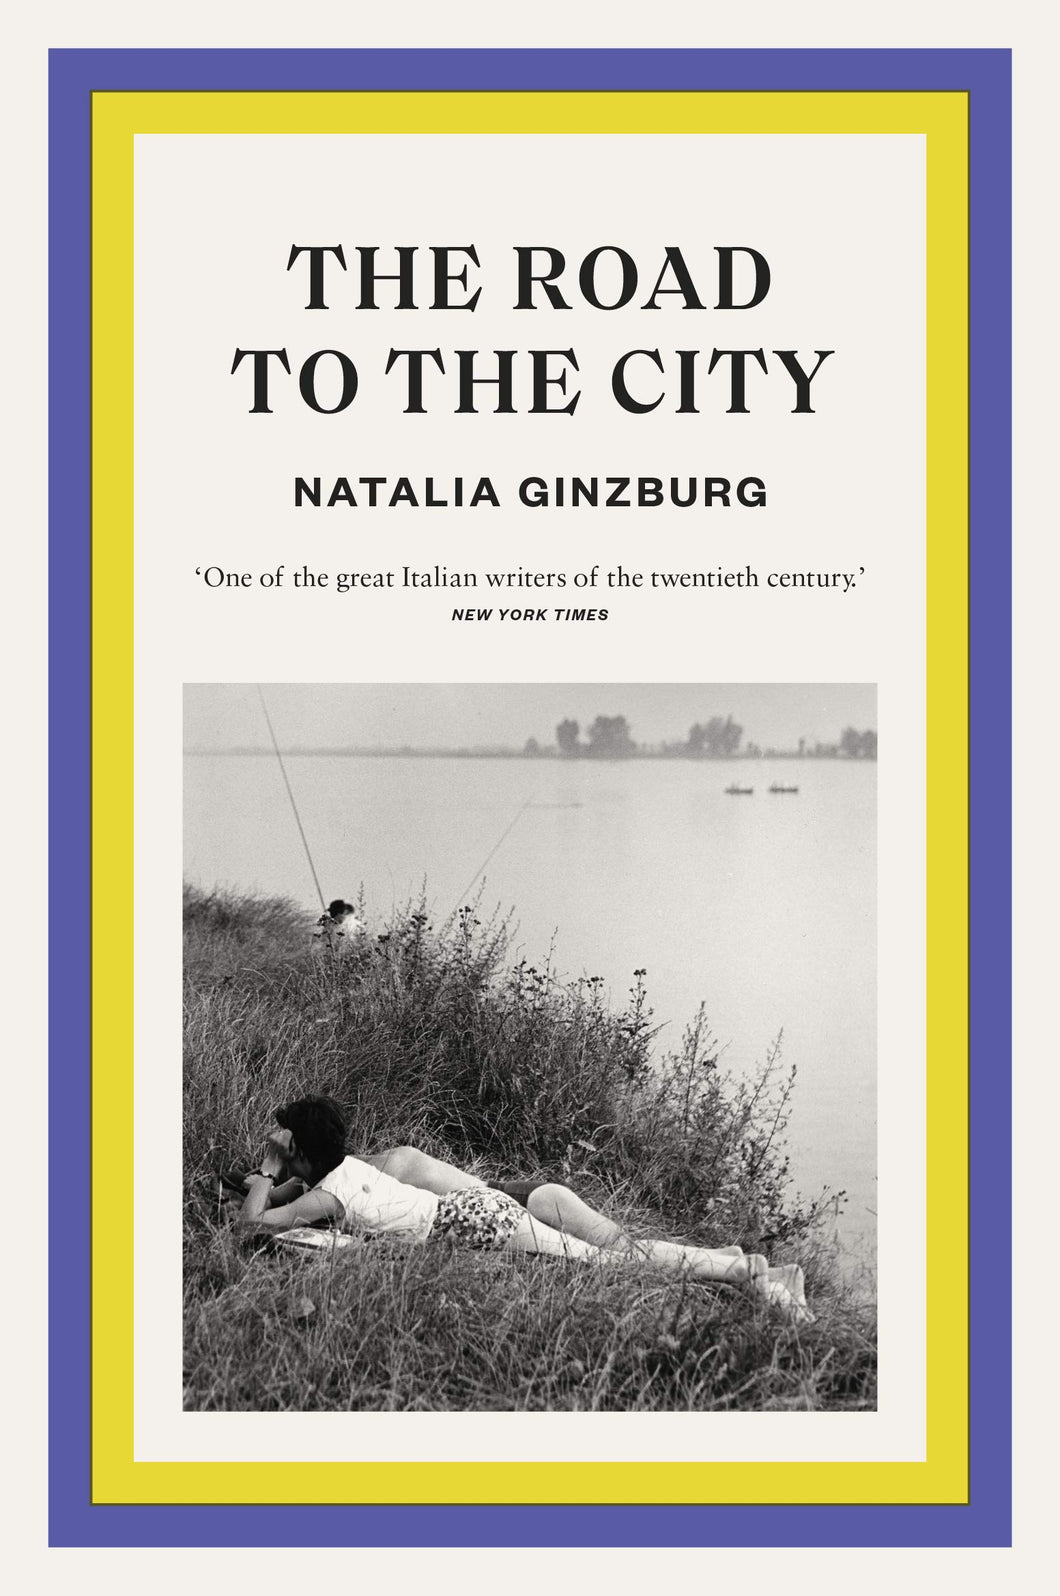 The Road to the City by Natalia Ginzburg